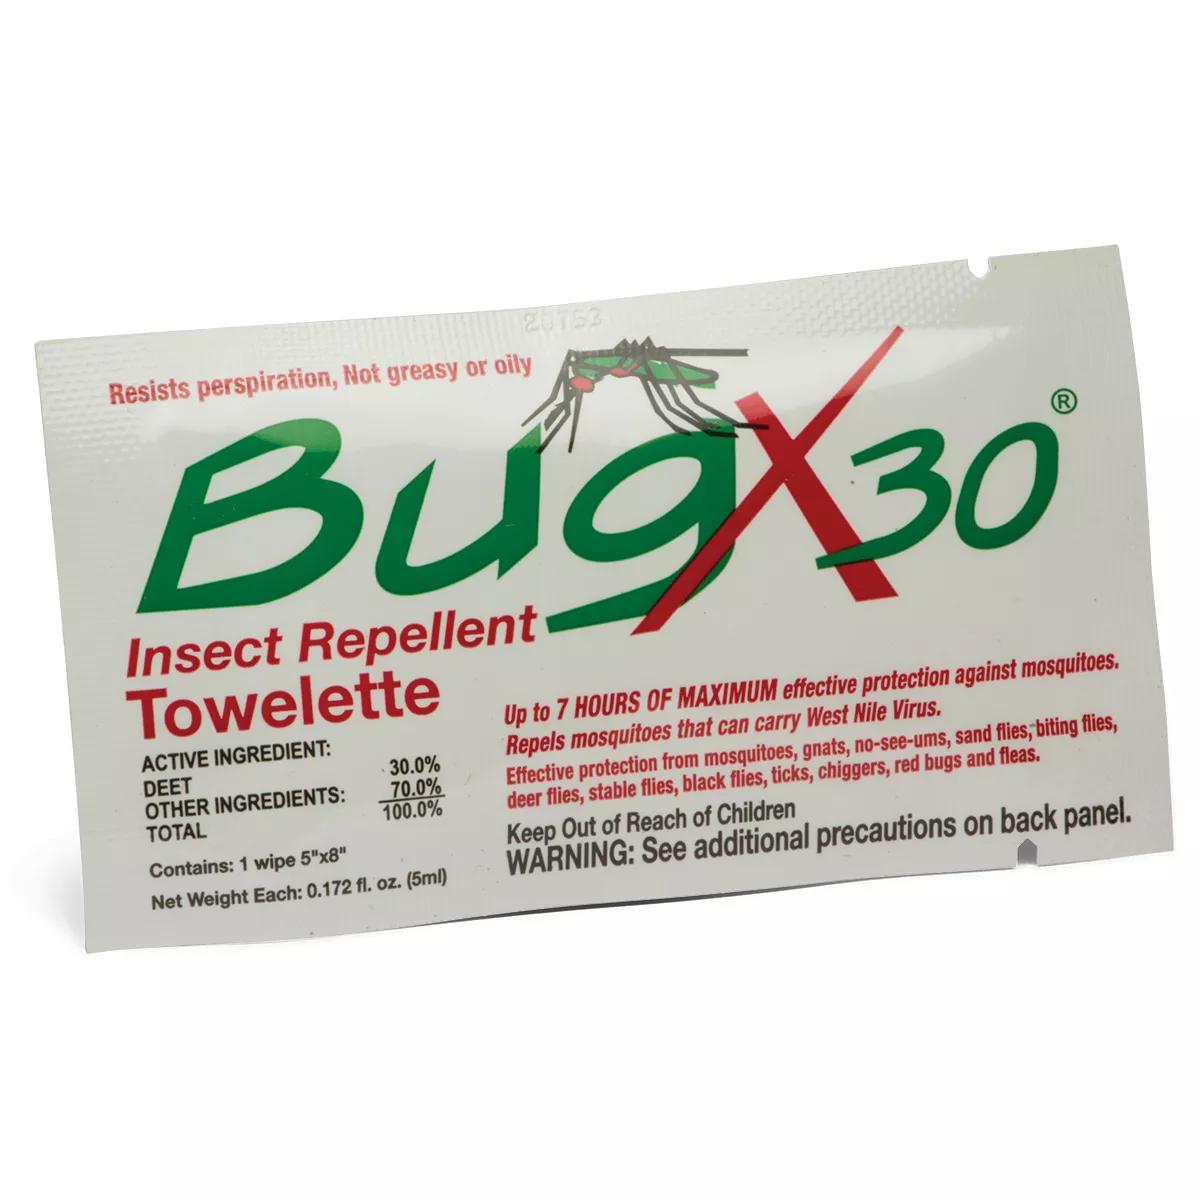 Insect Repellent Towelette